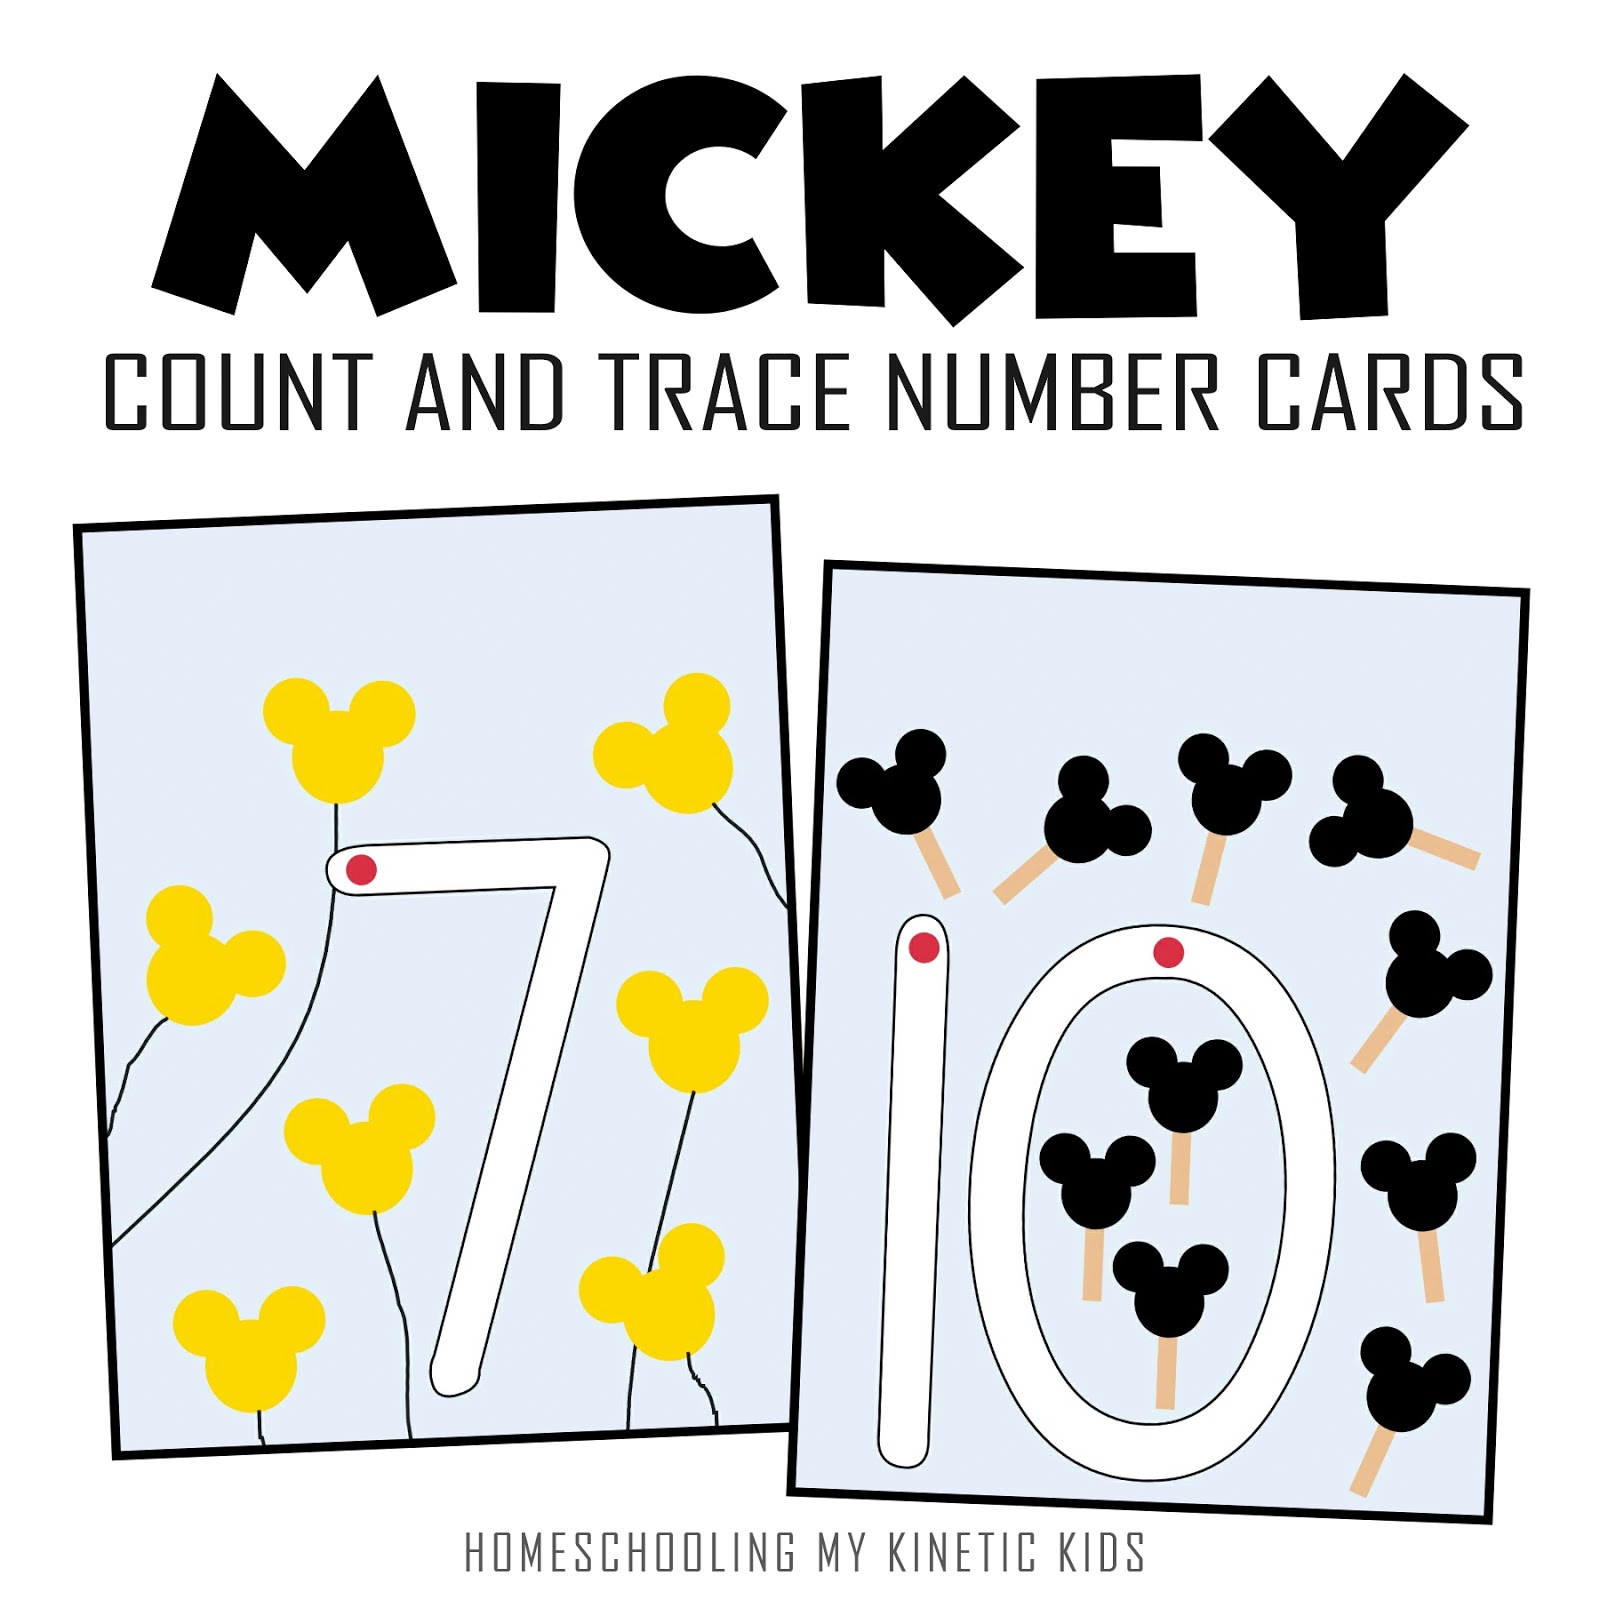 Worksheet Mickey Trace Numbers And Counting